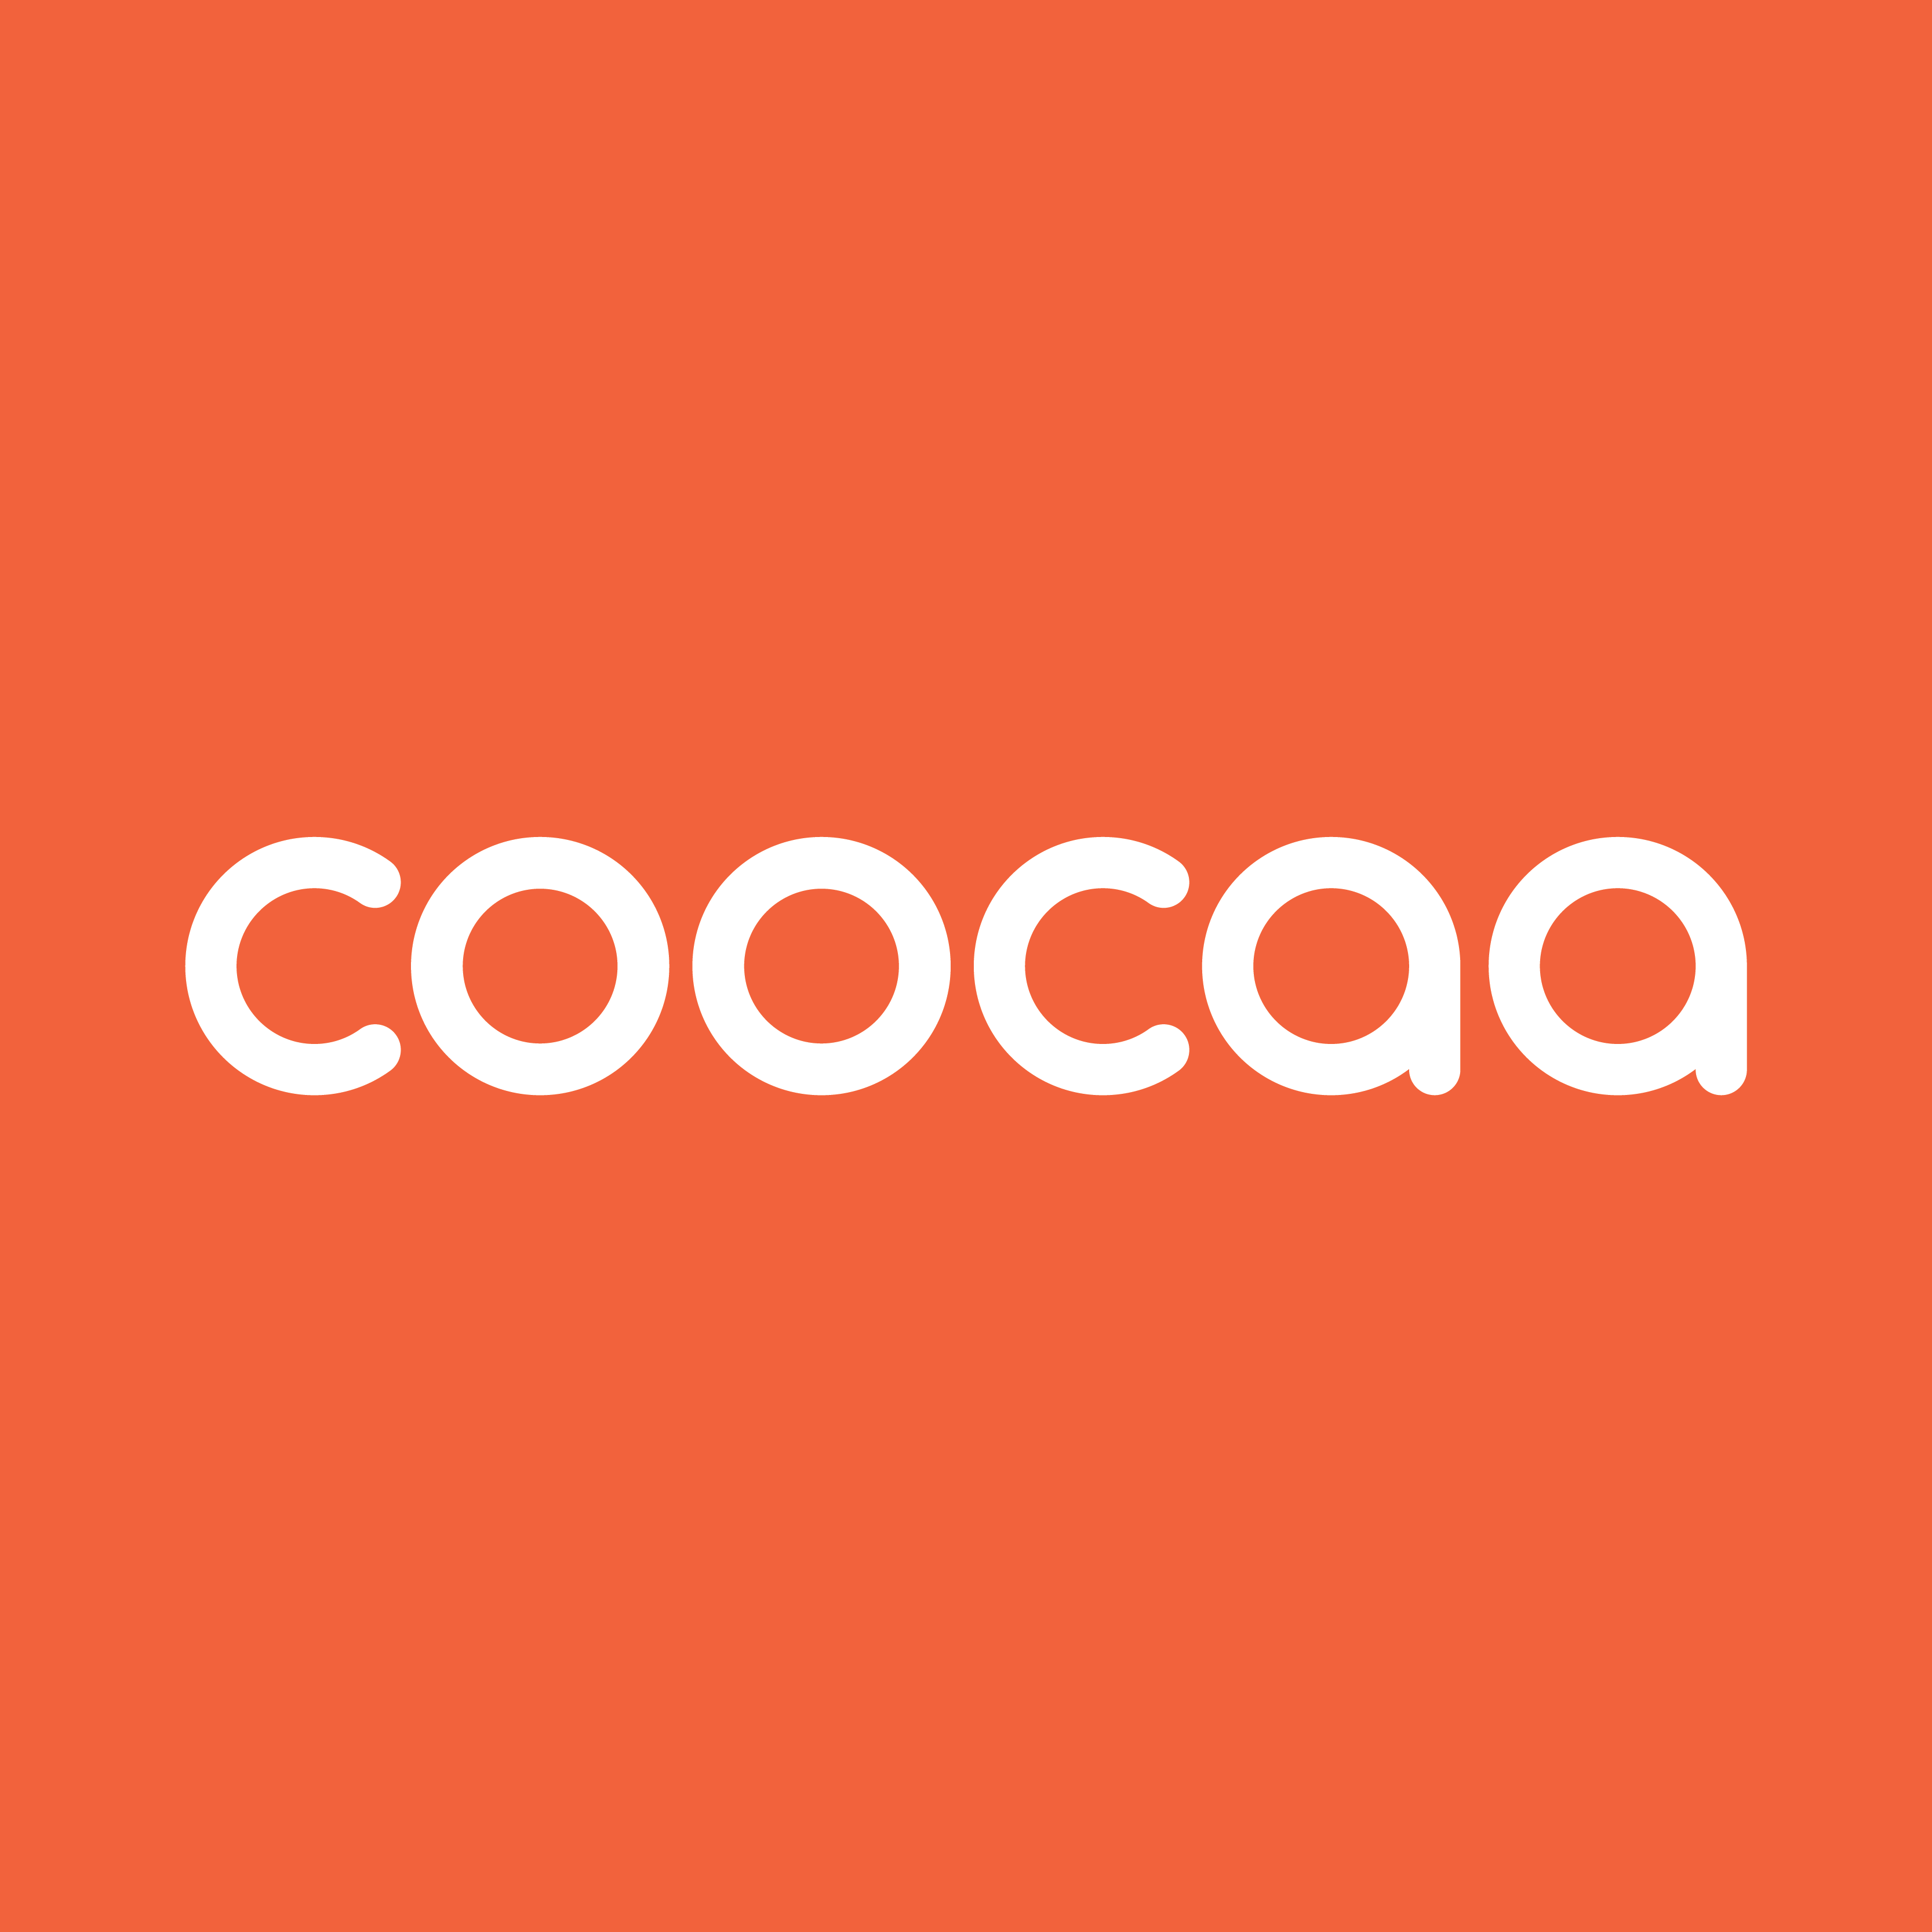 Coocaa Official Store